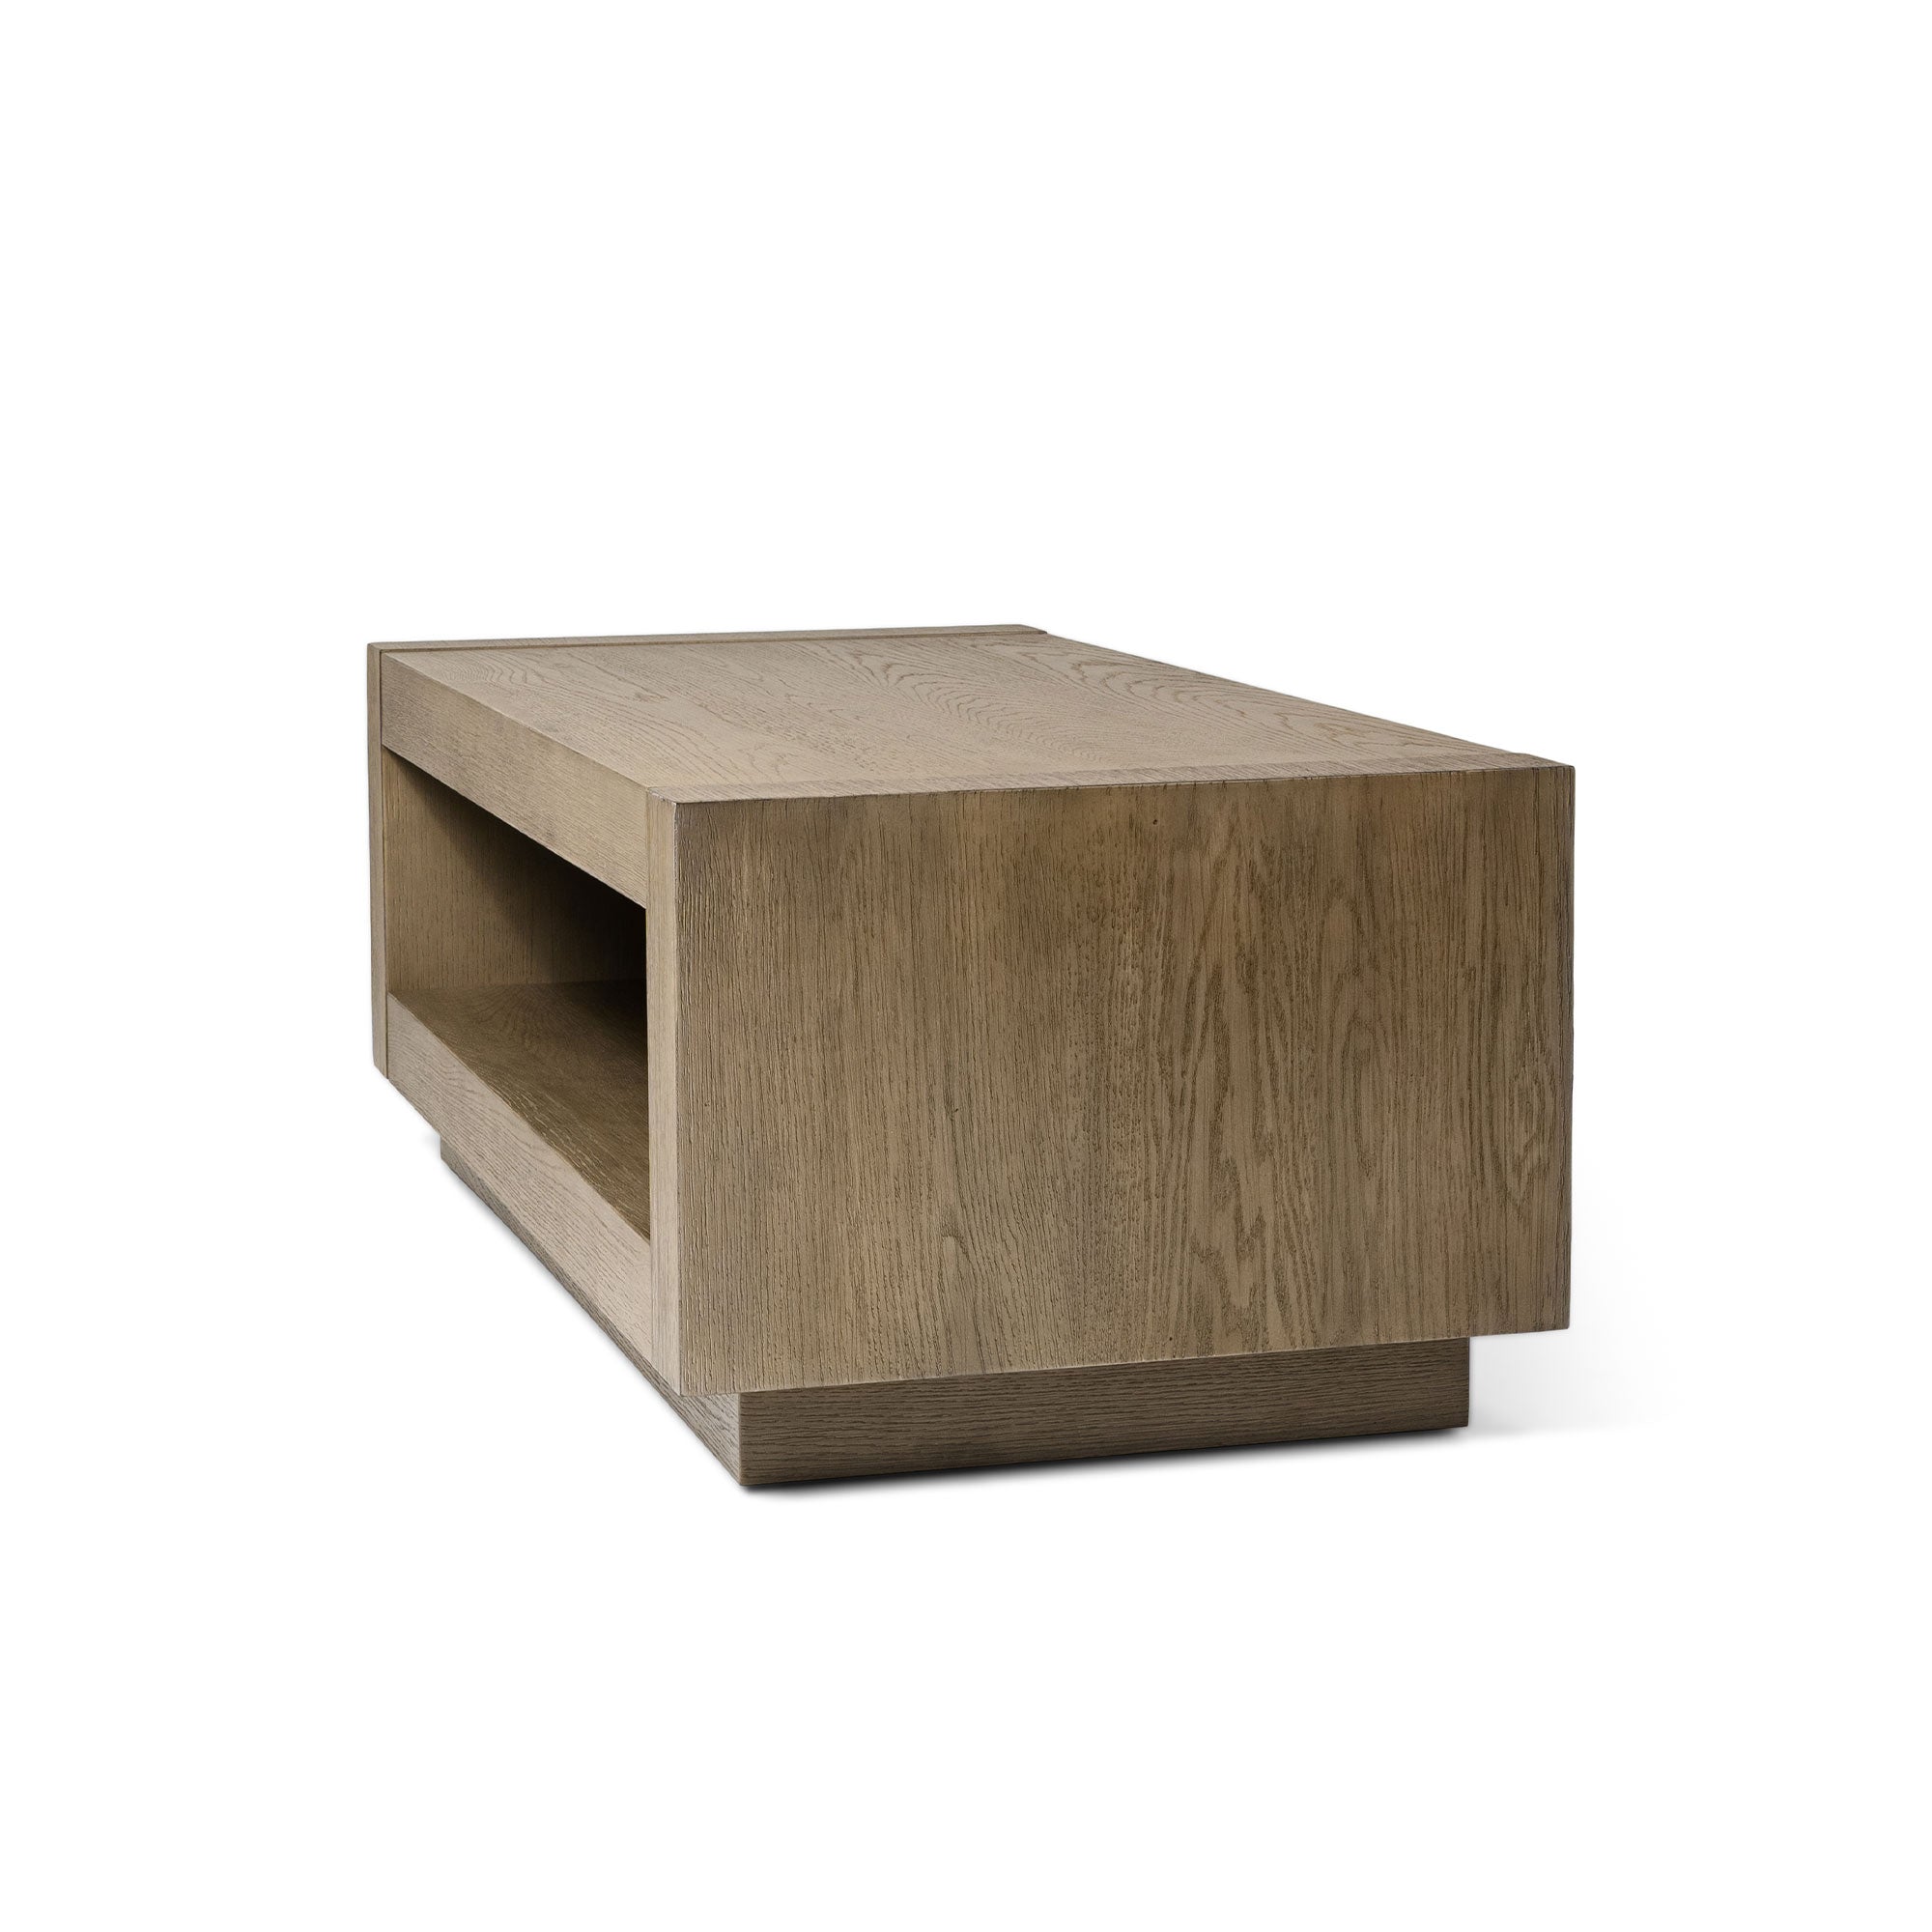 Artemis Contemporary Wooden Coffee Table in Refined Grey Finish in Furniture | Tables | Accent Tables | Coffee Tables by Maven Lane